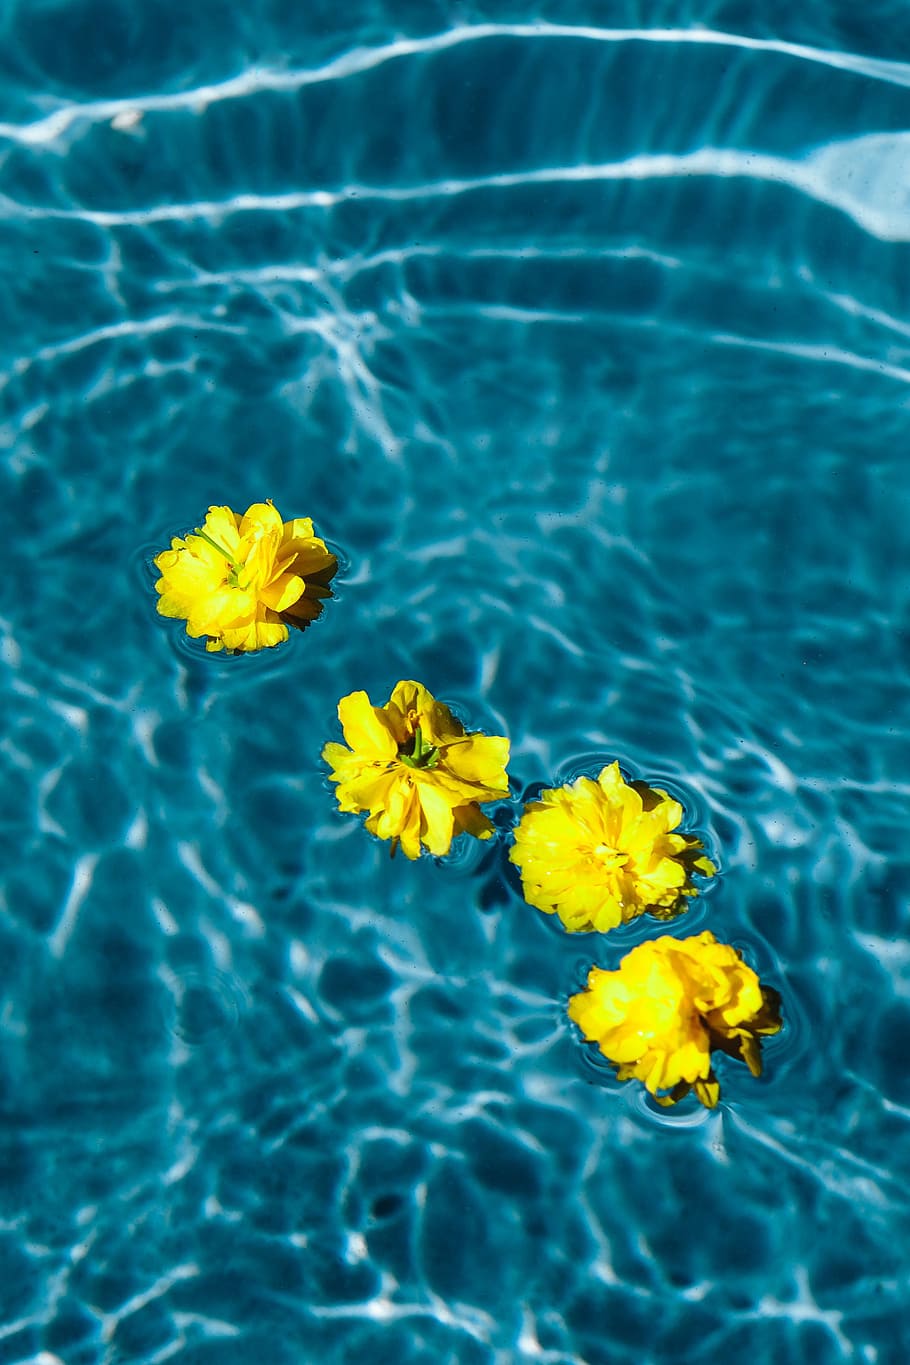 HD wallpaper: Small yellow flowers floating in the pool, day, summer, water  | Wallpaper Flare